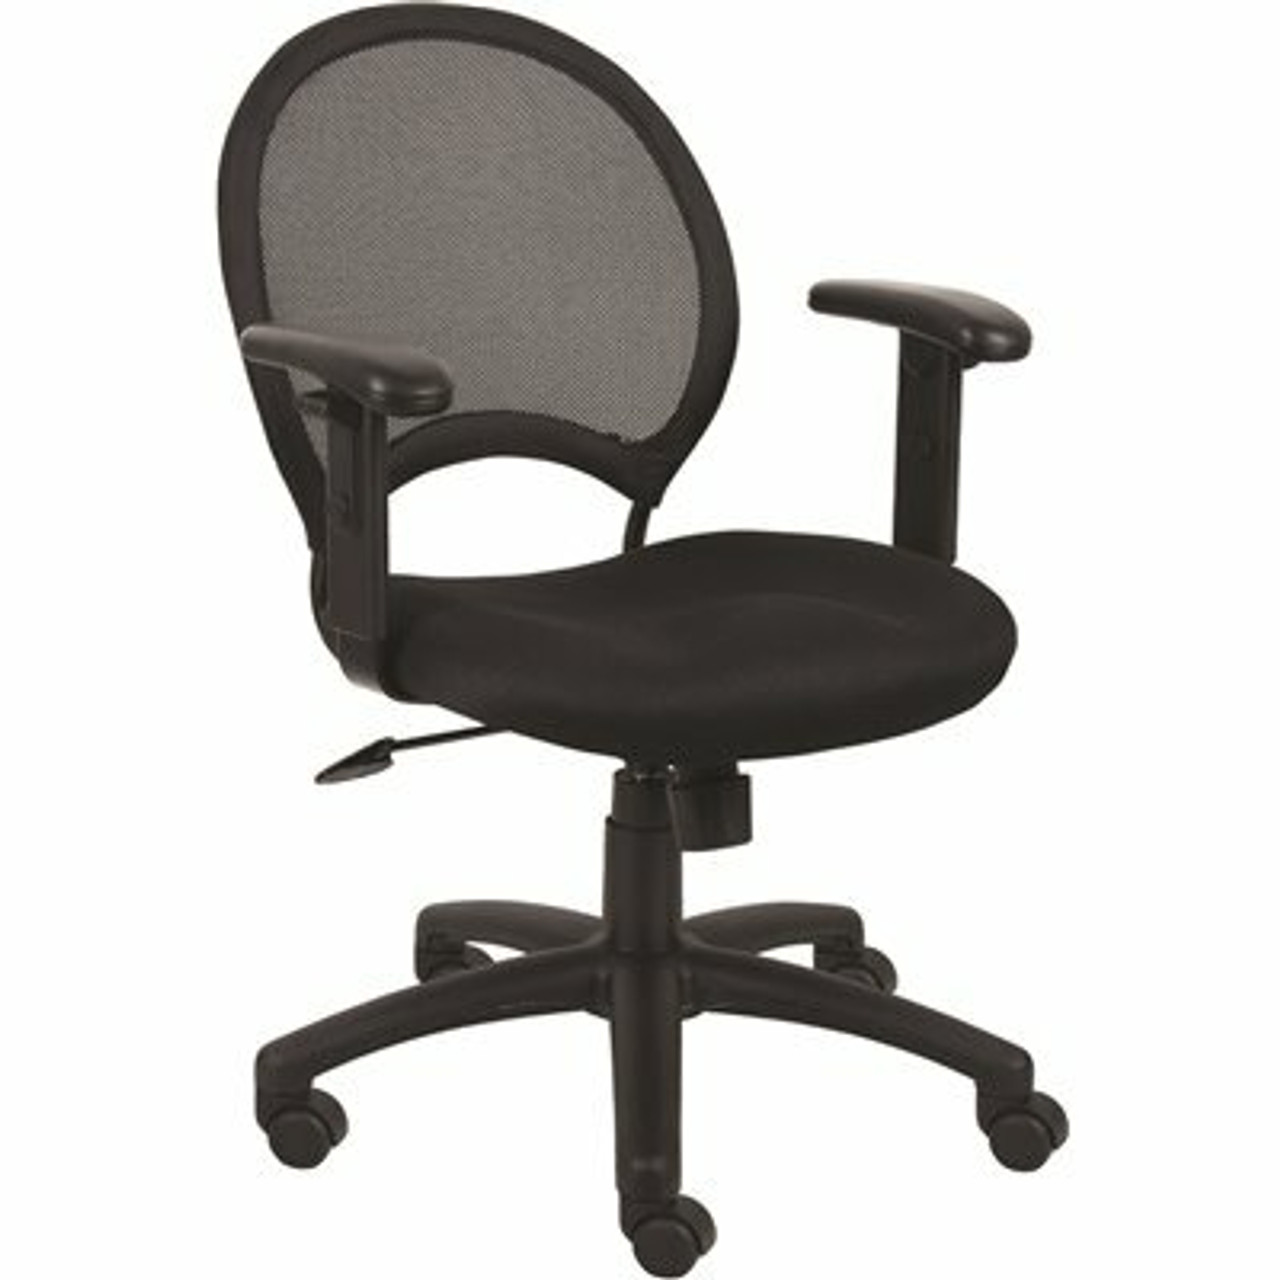 Boss Office Products Black Mesh Back And Fabric Seat Adjustable Arms Pneumatic Lift Task Chair